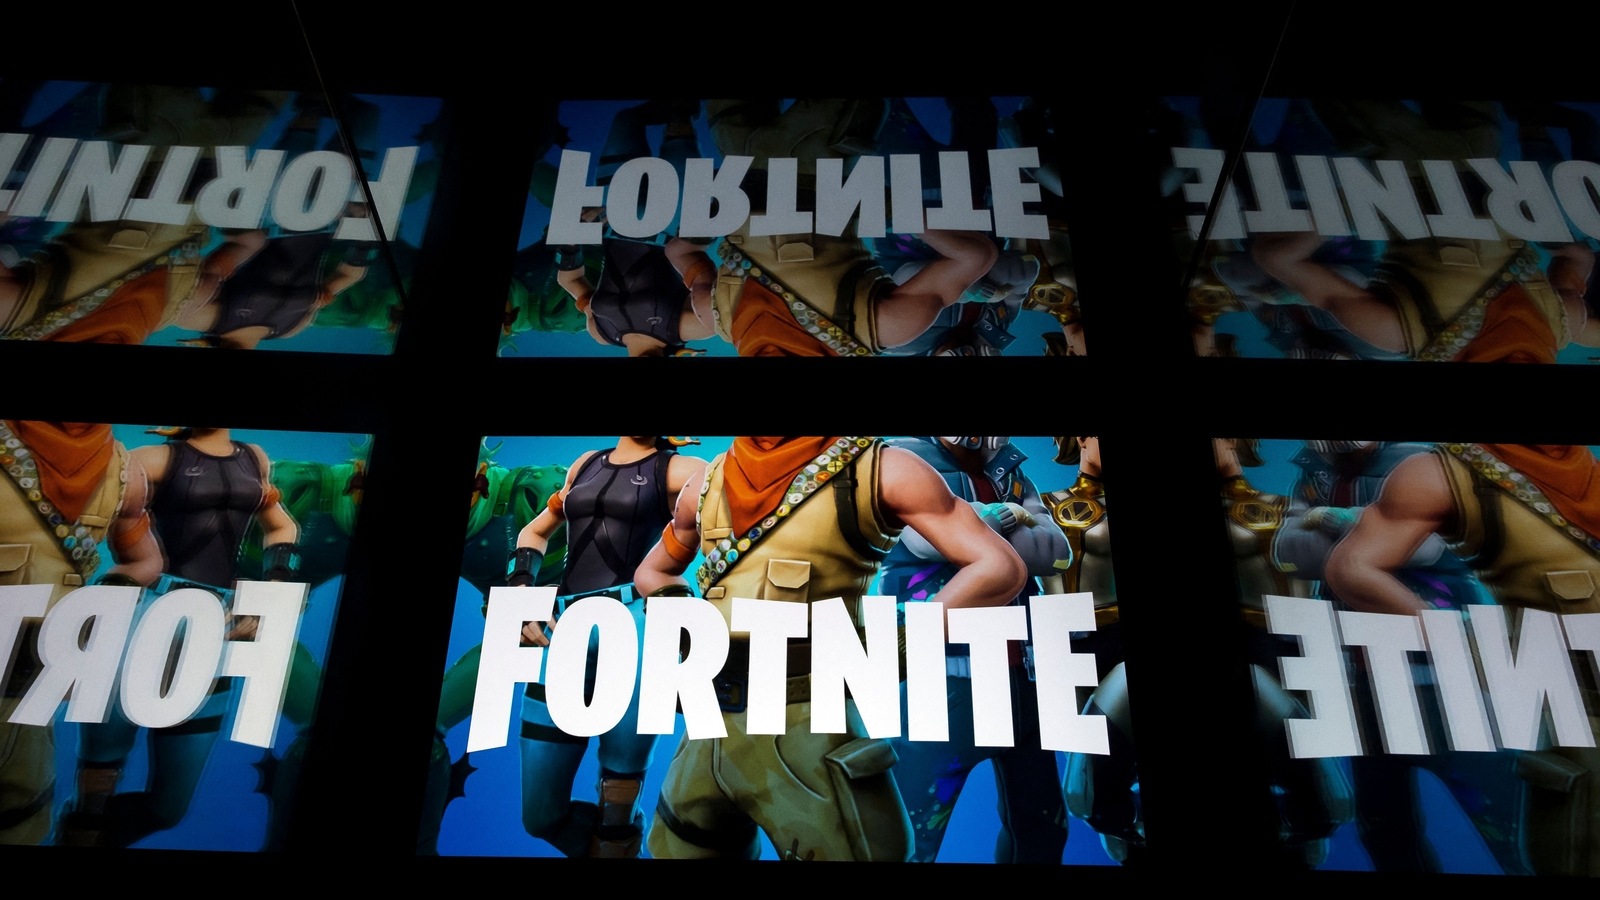 Fortnite has some 'bad news' for iPhone, Android users - Times of India